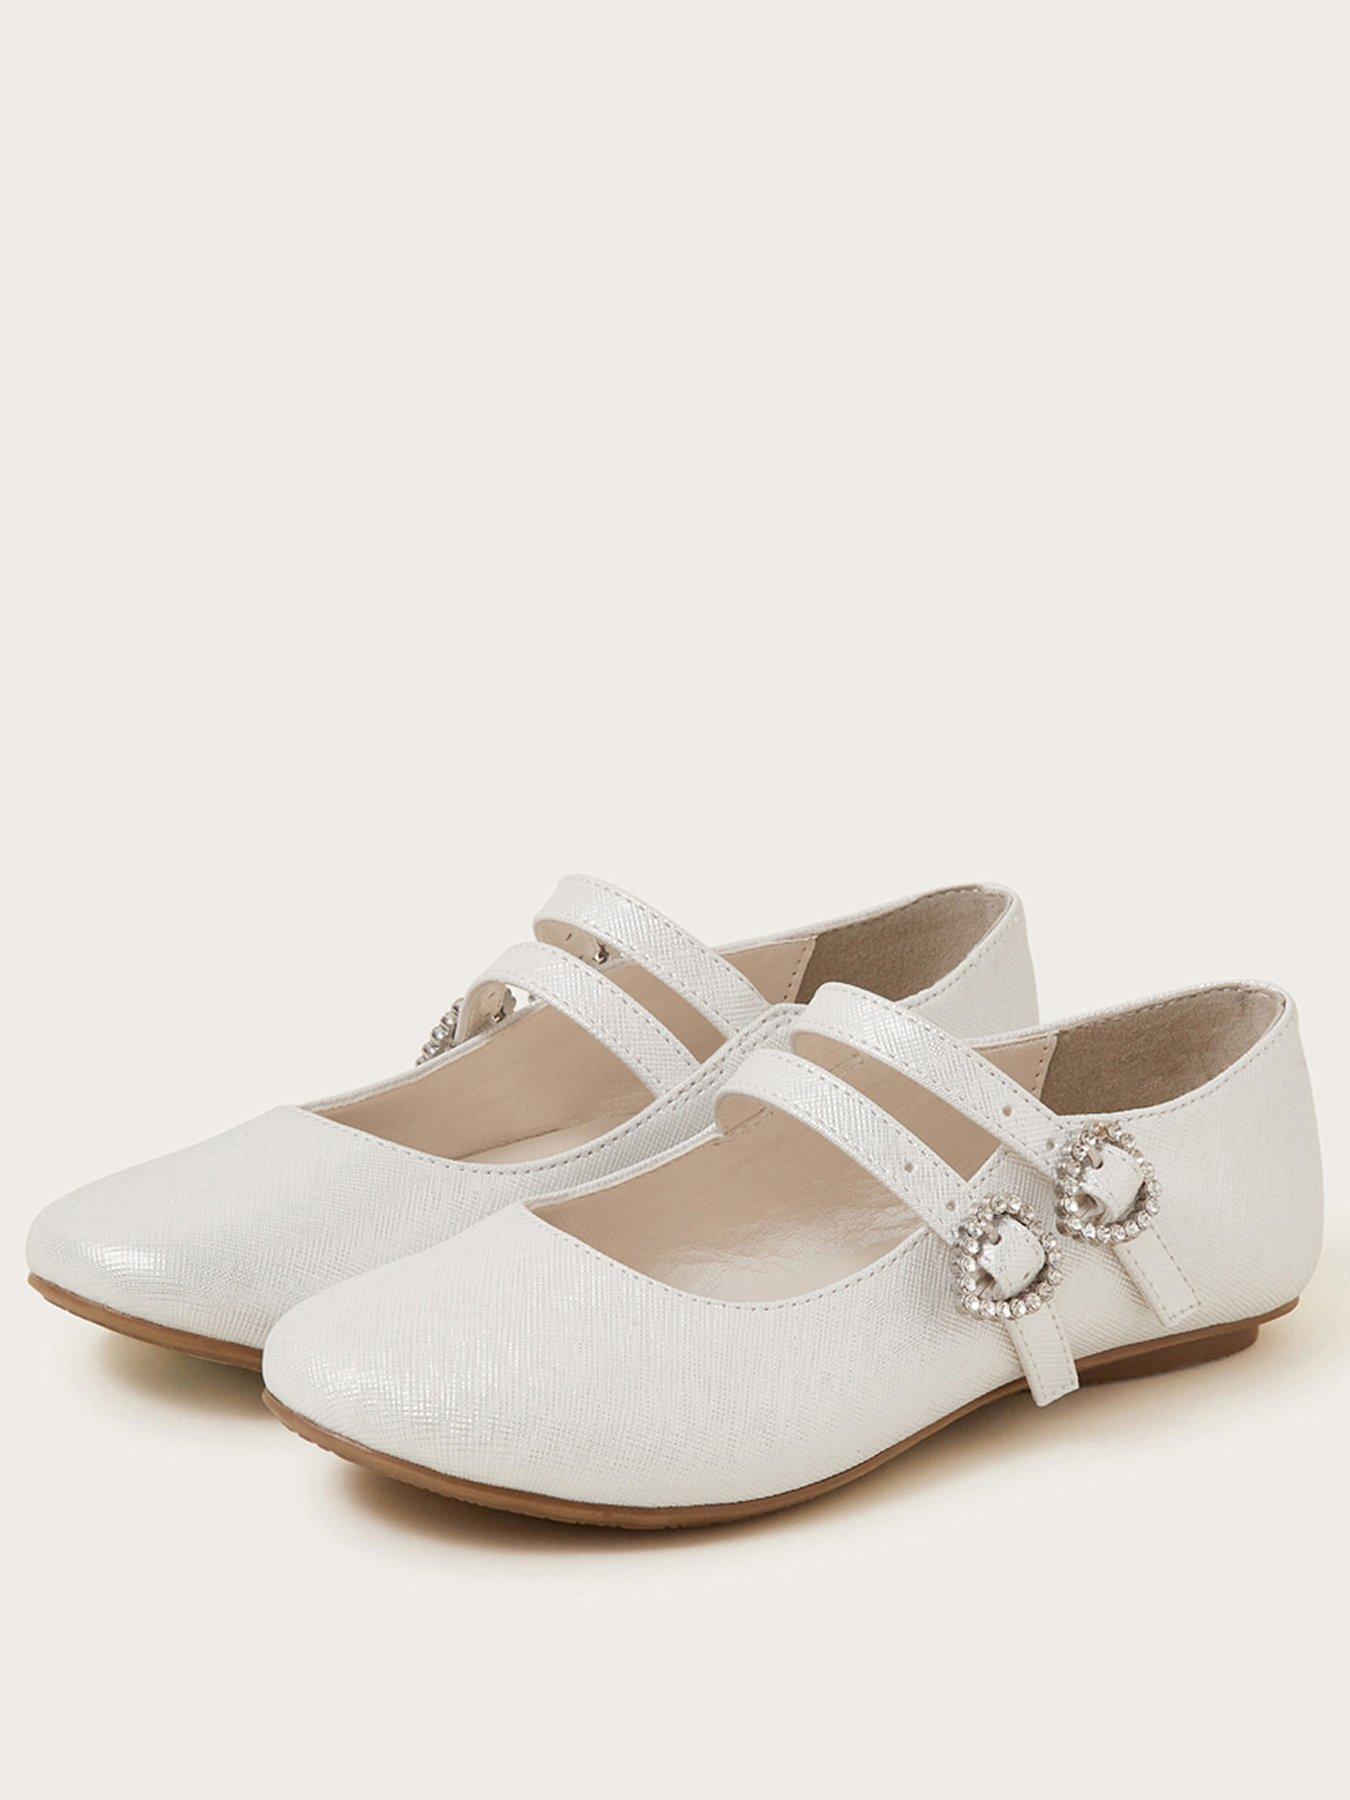 Monsoon Girls Sparkle Two Strap Ballerina Flat Shoes - Silver | Very.co.uk